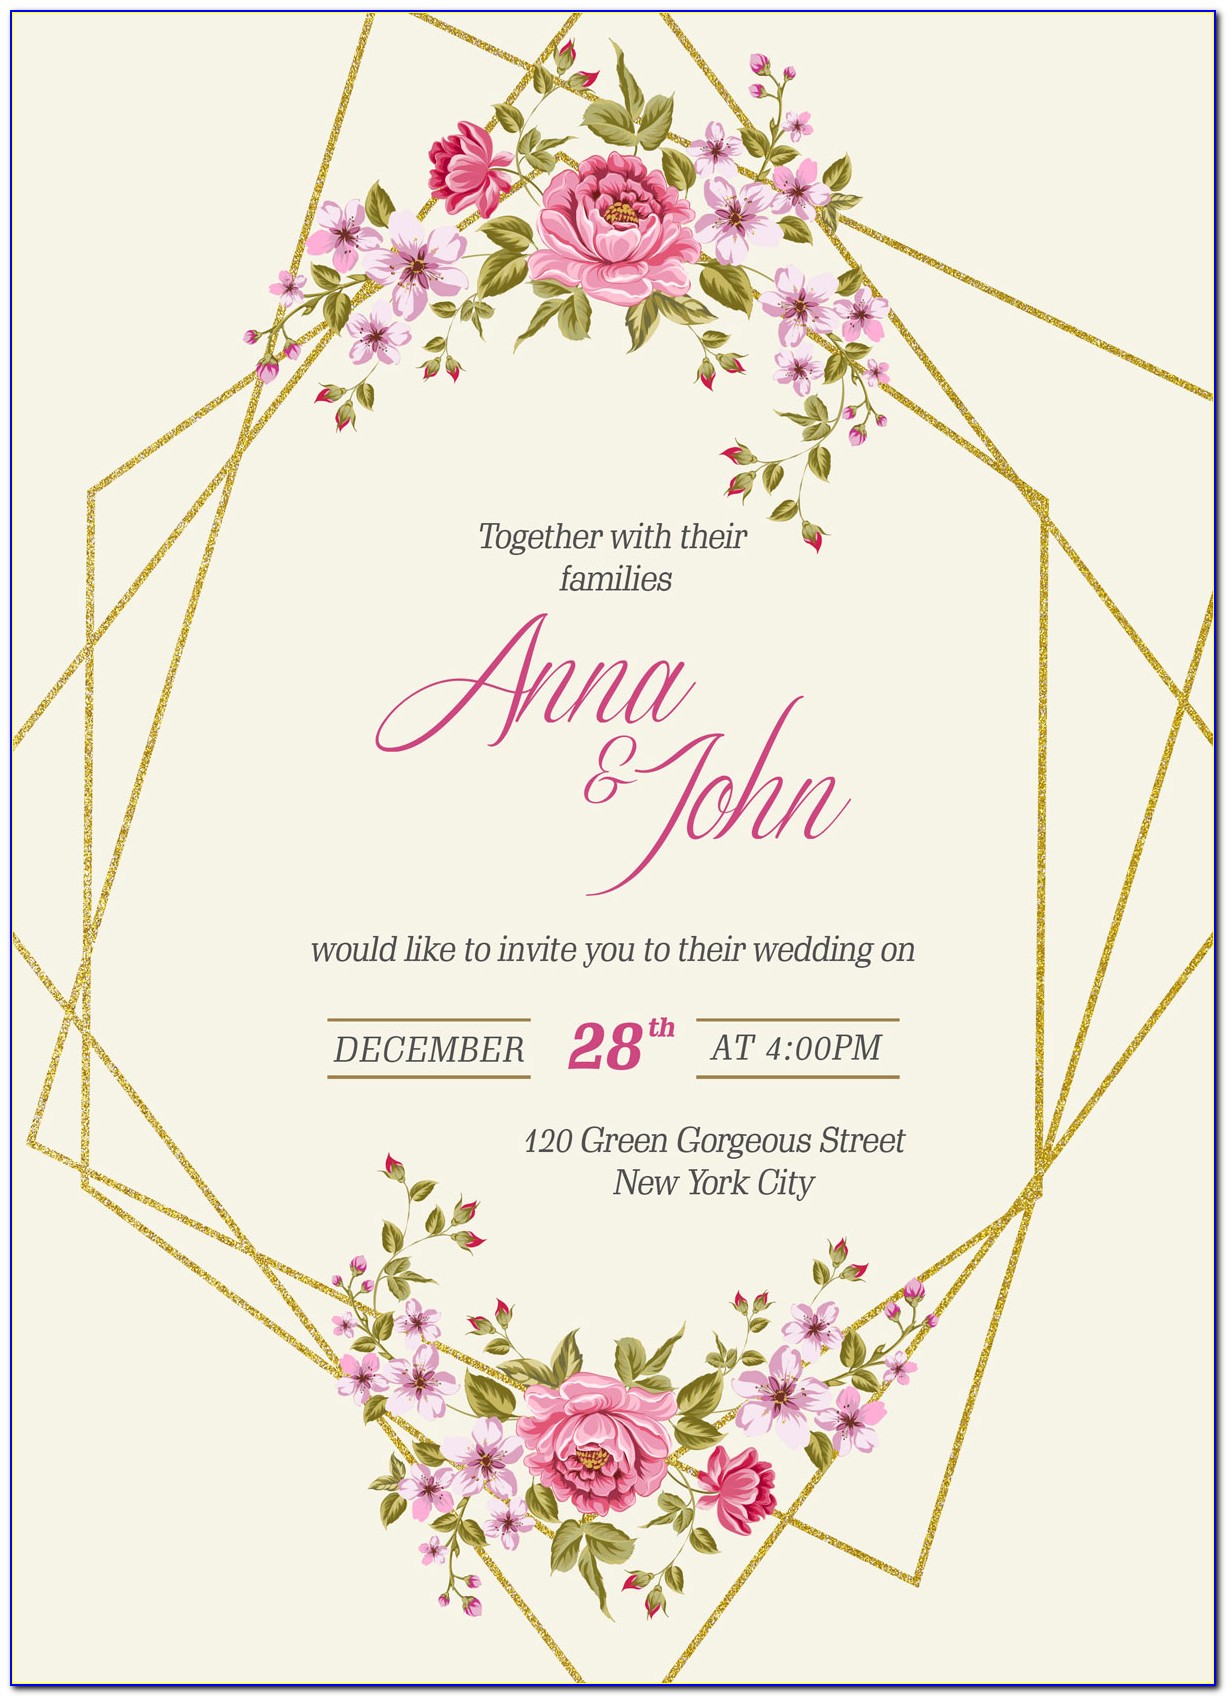 Free Engagement Invitation Card Templates Download